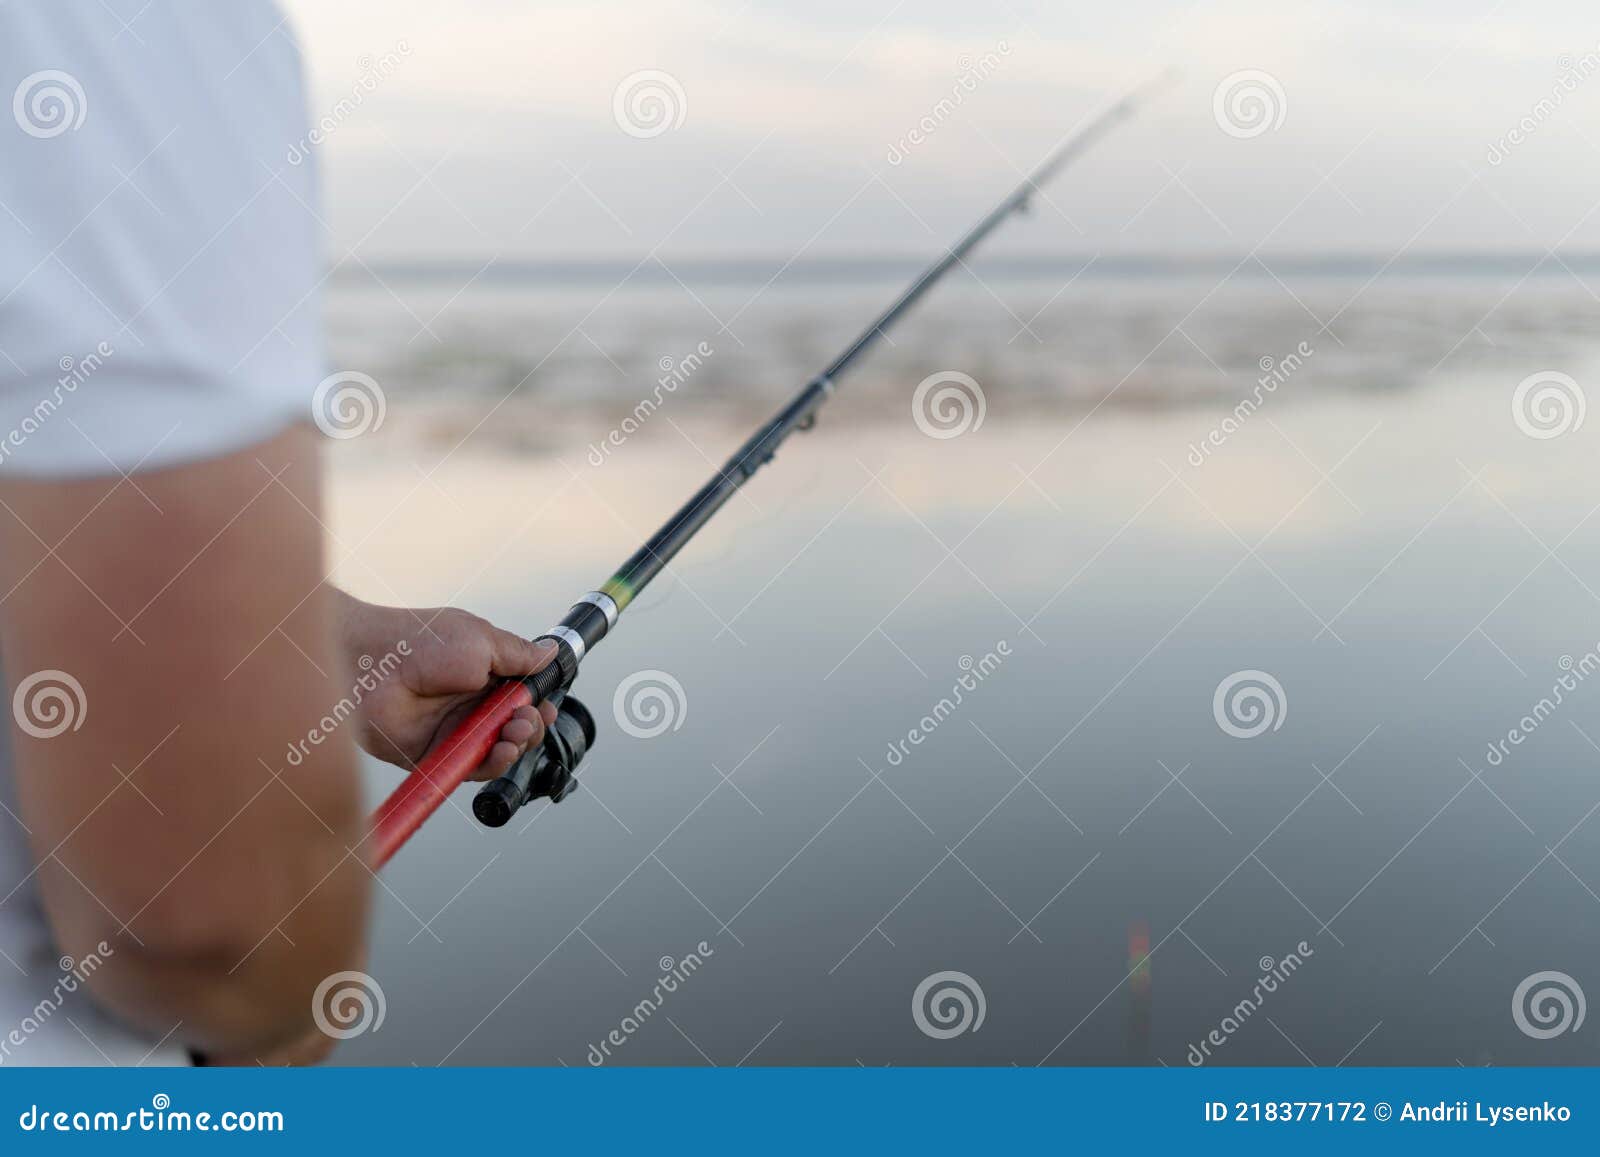 Fishing Rod with a Float in Male Hands. the Man is a Fisherman